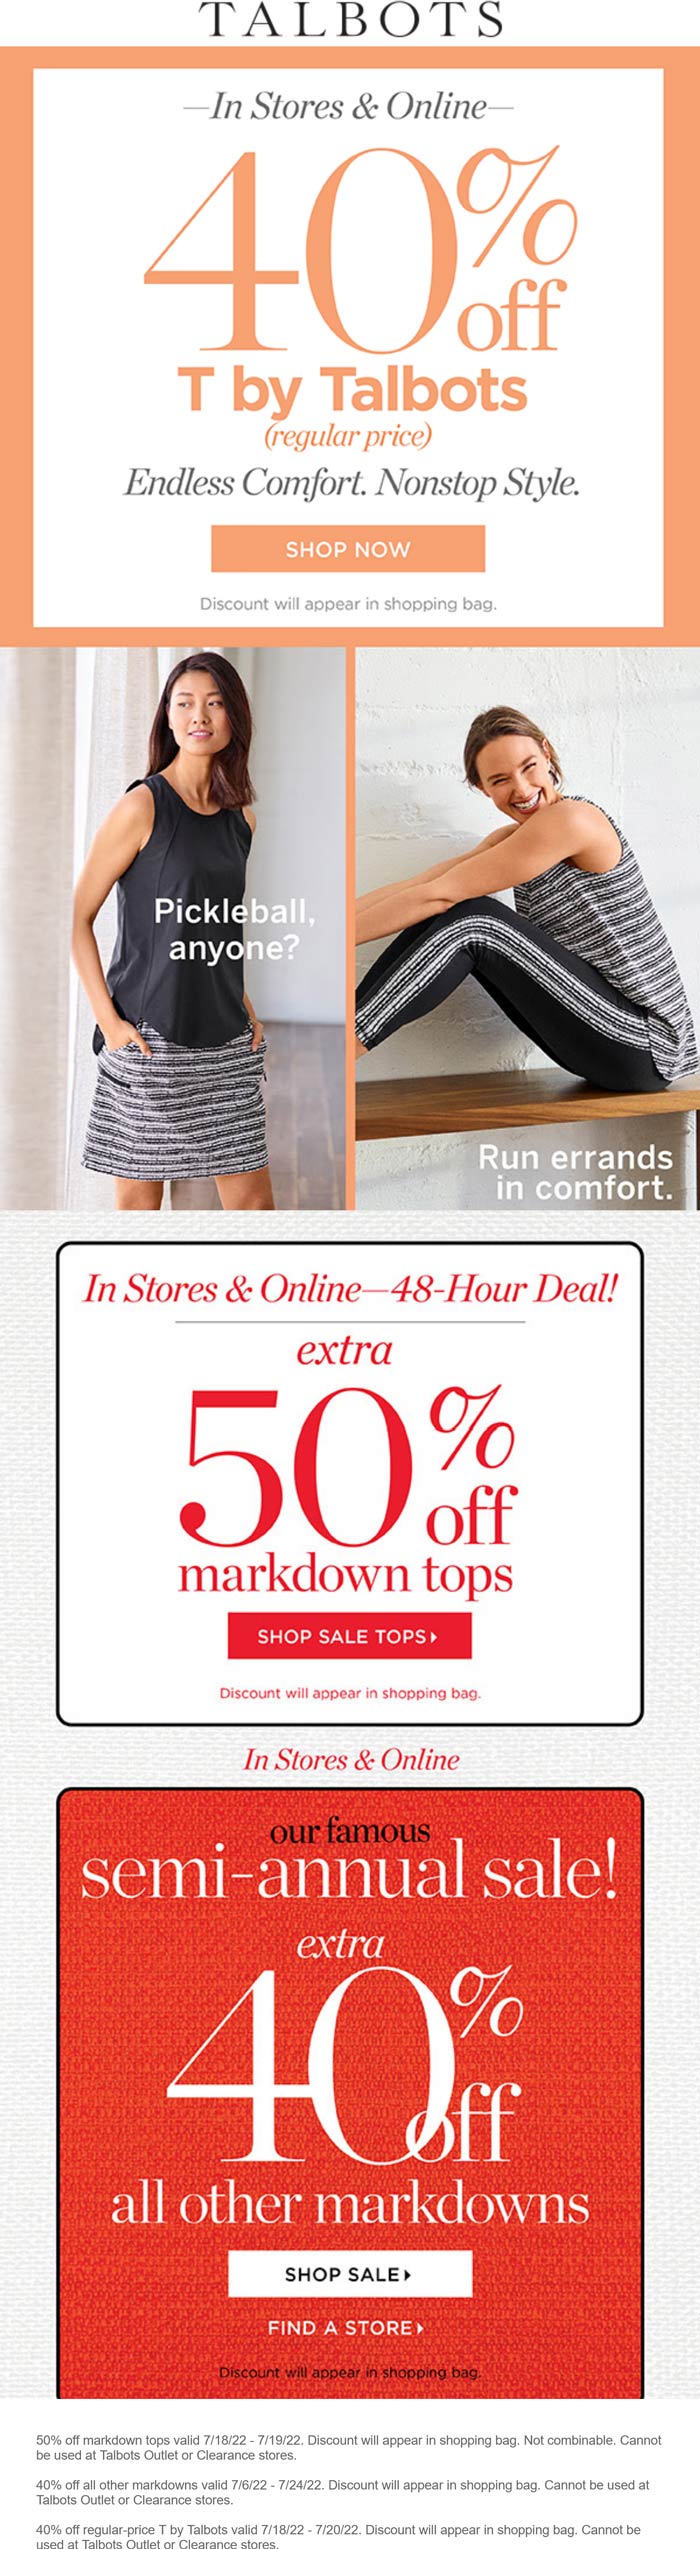 Talbots stores Coupon  Extra 50% off sale tops & more at Talbots, ditto online #talbots 